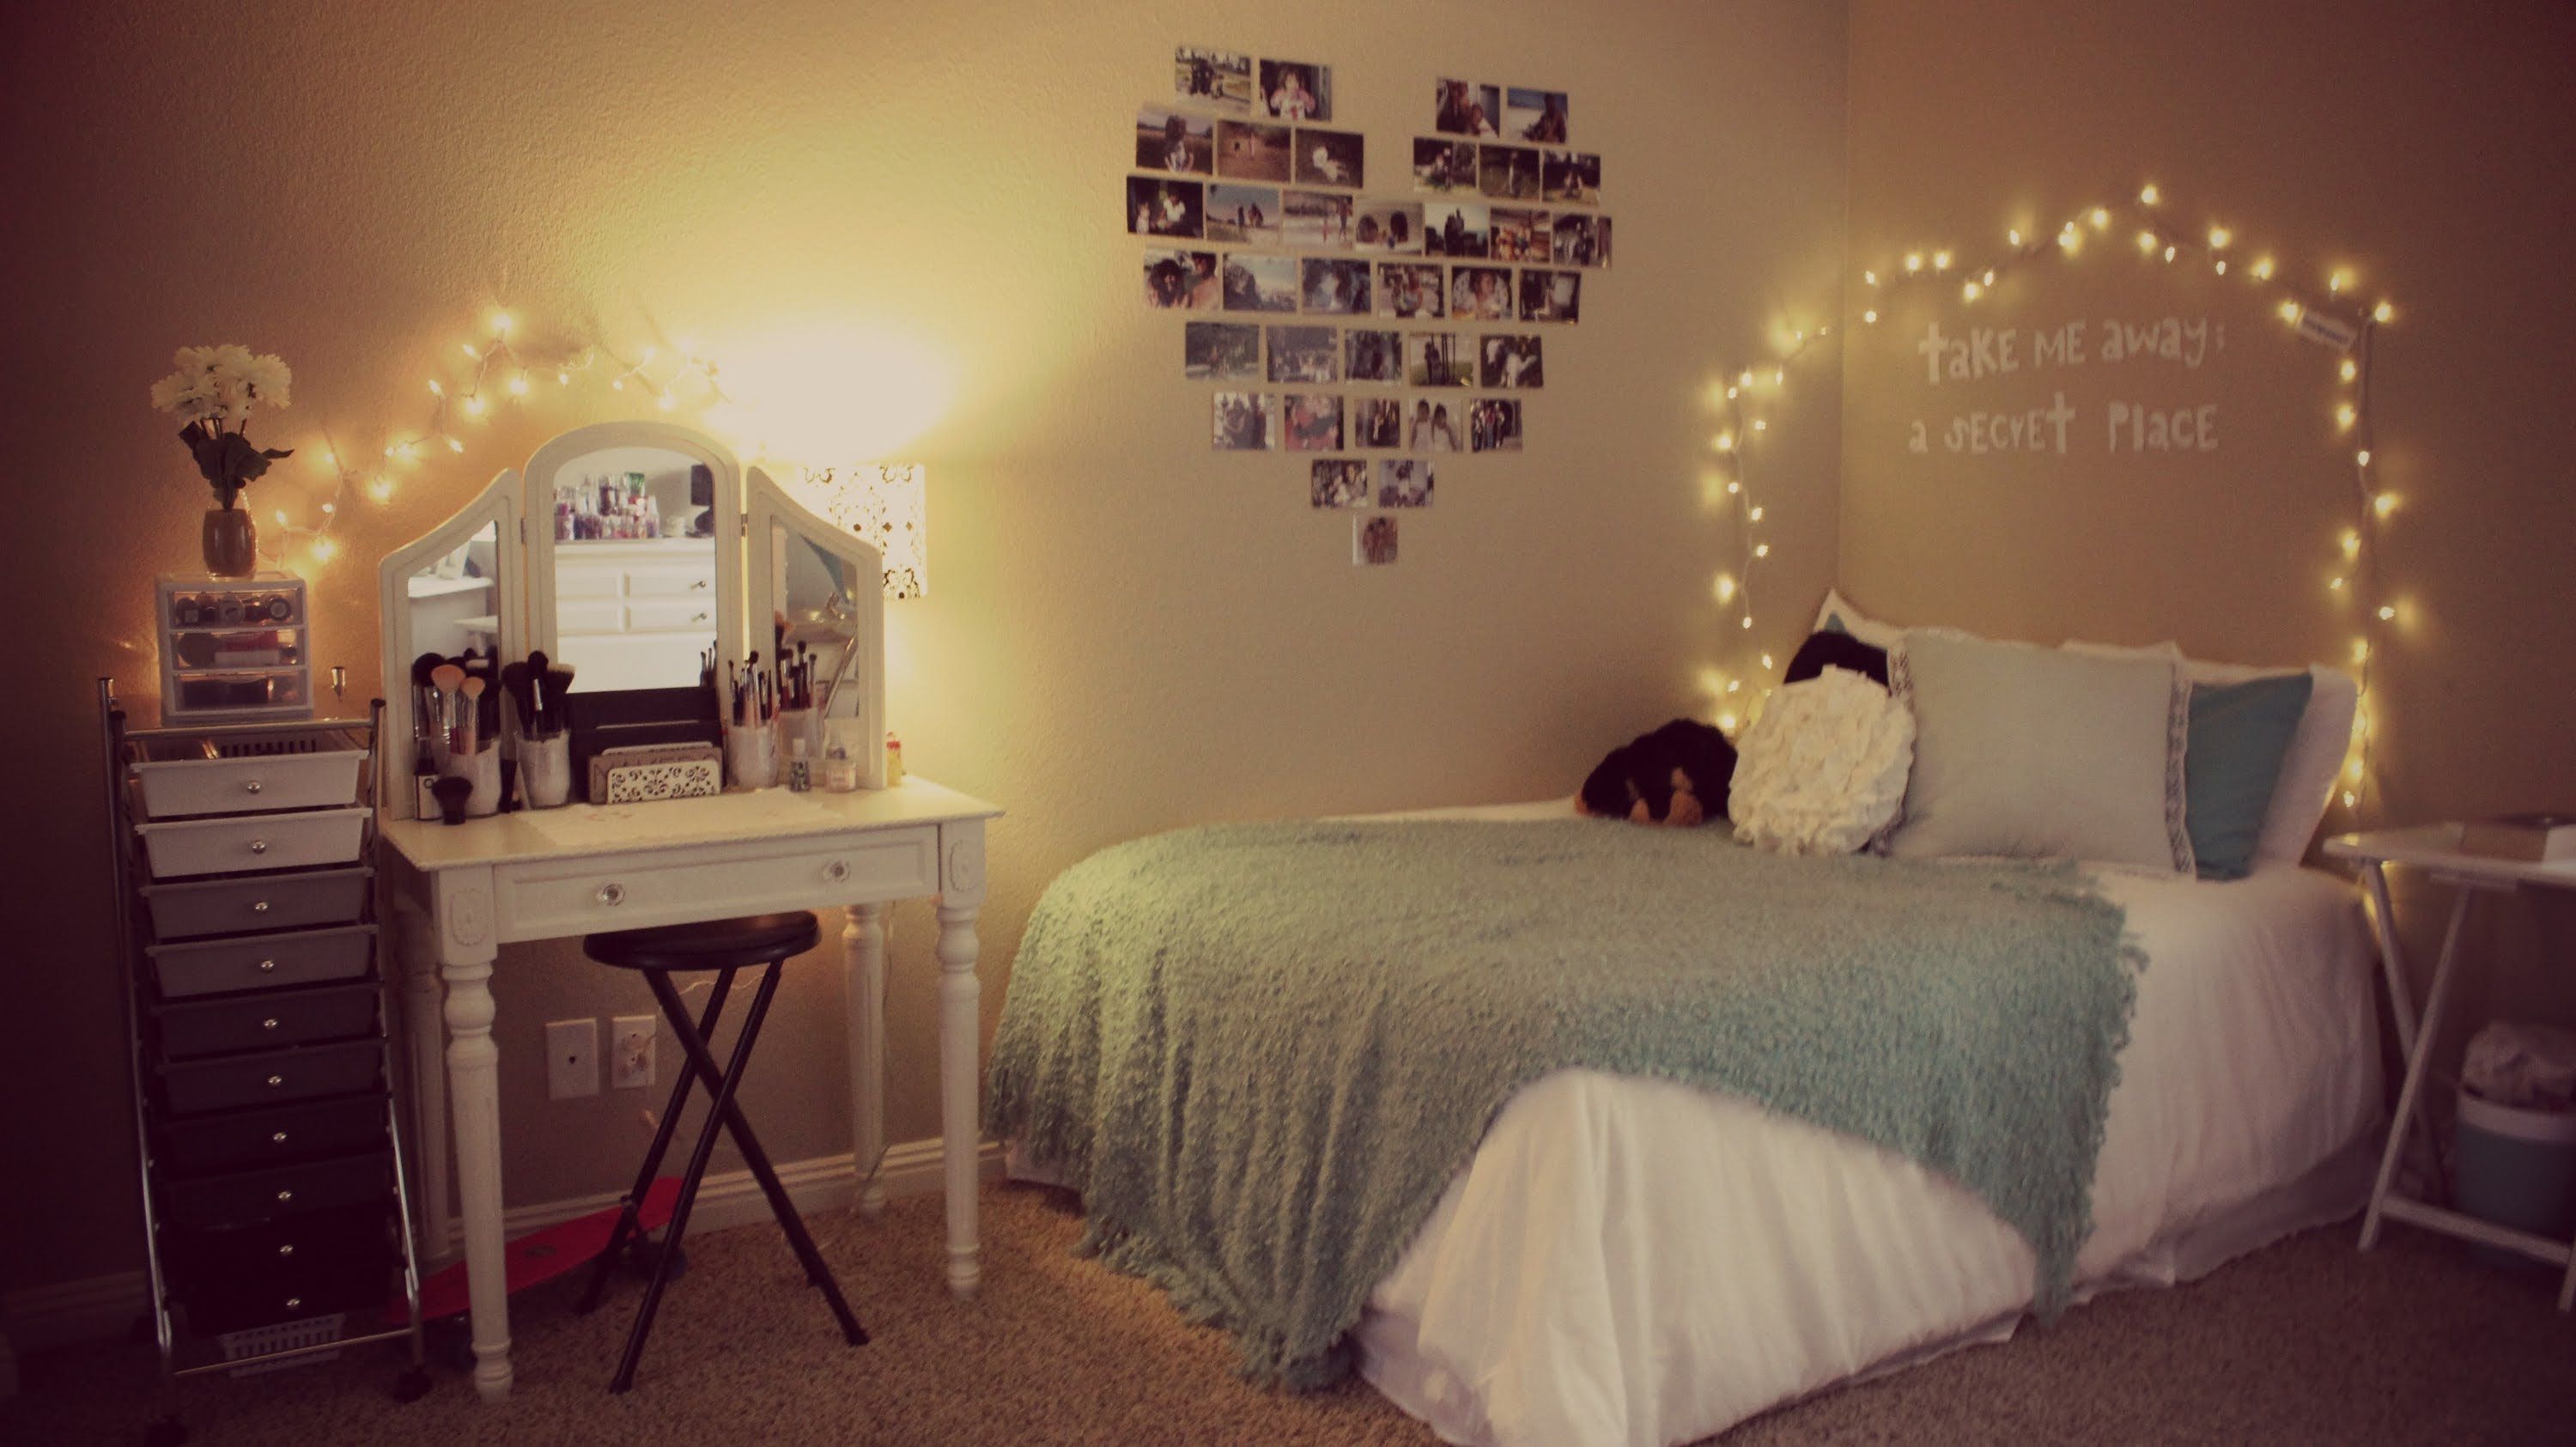 Reading Nook Or Bedroom Idea For A Teenager Description From